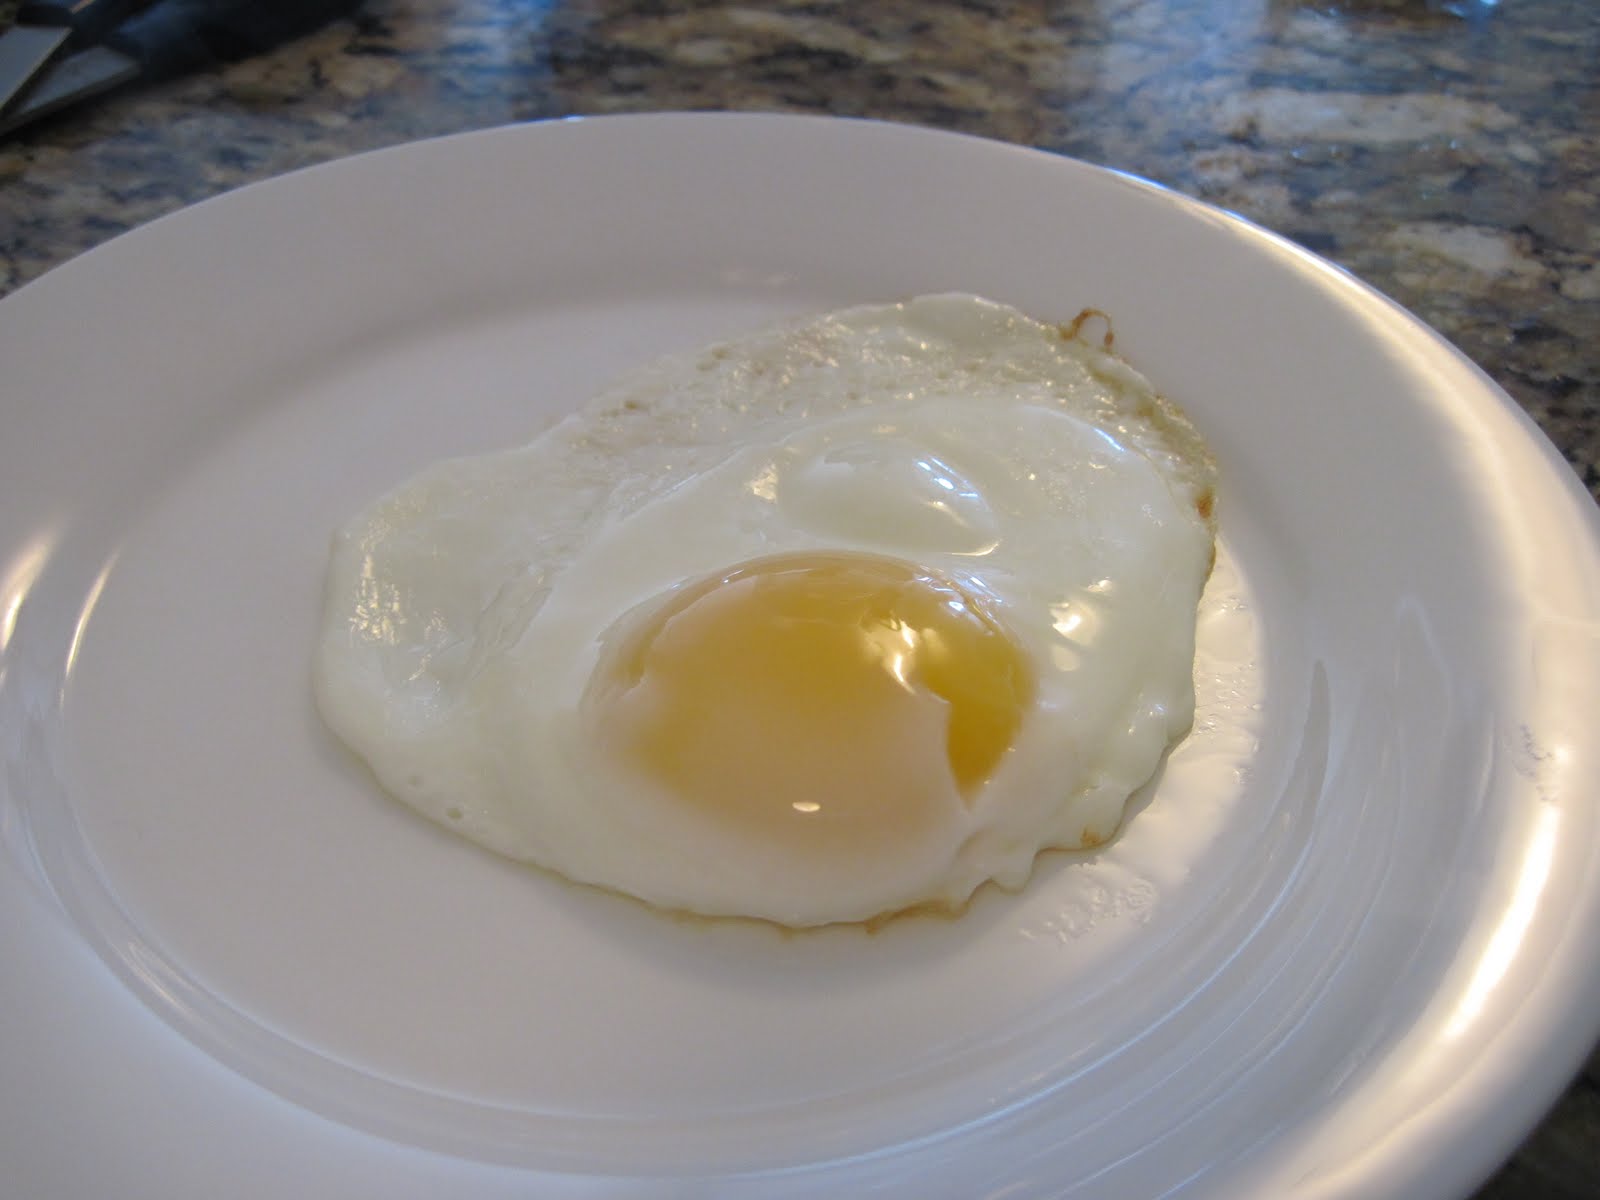 How many calories are in one fried egg?